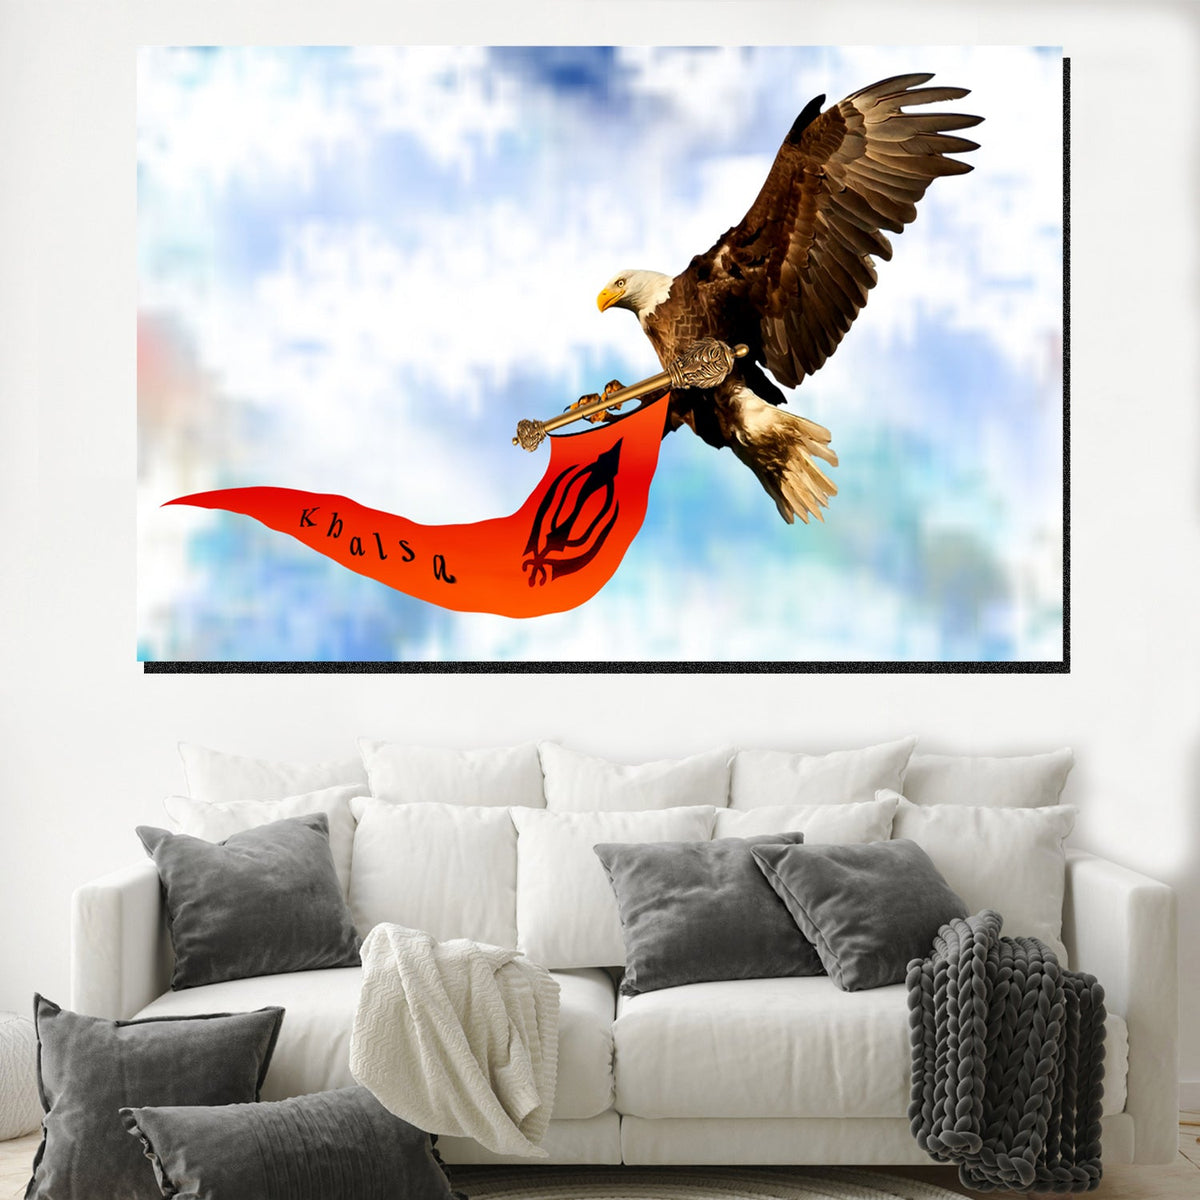 https://cdn.shopify.com/s/files/1/0387/9986/8044/products/EaglewithKhalsaFlagCanvasArtprintStretched-4.jpg